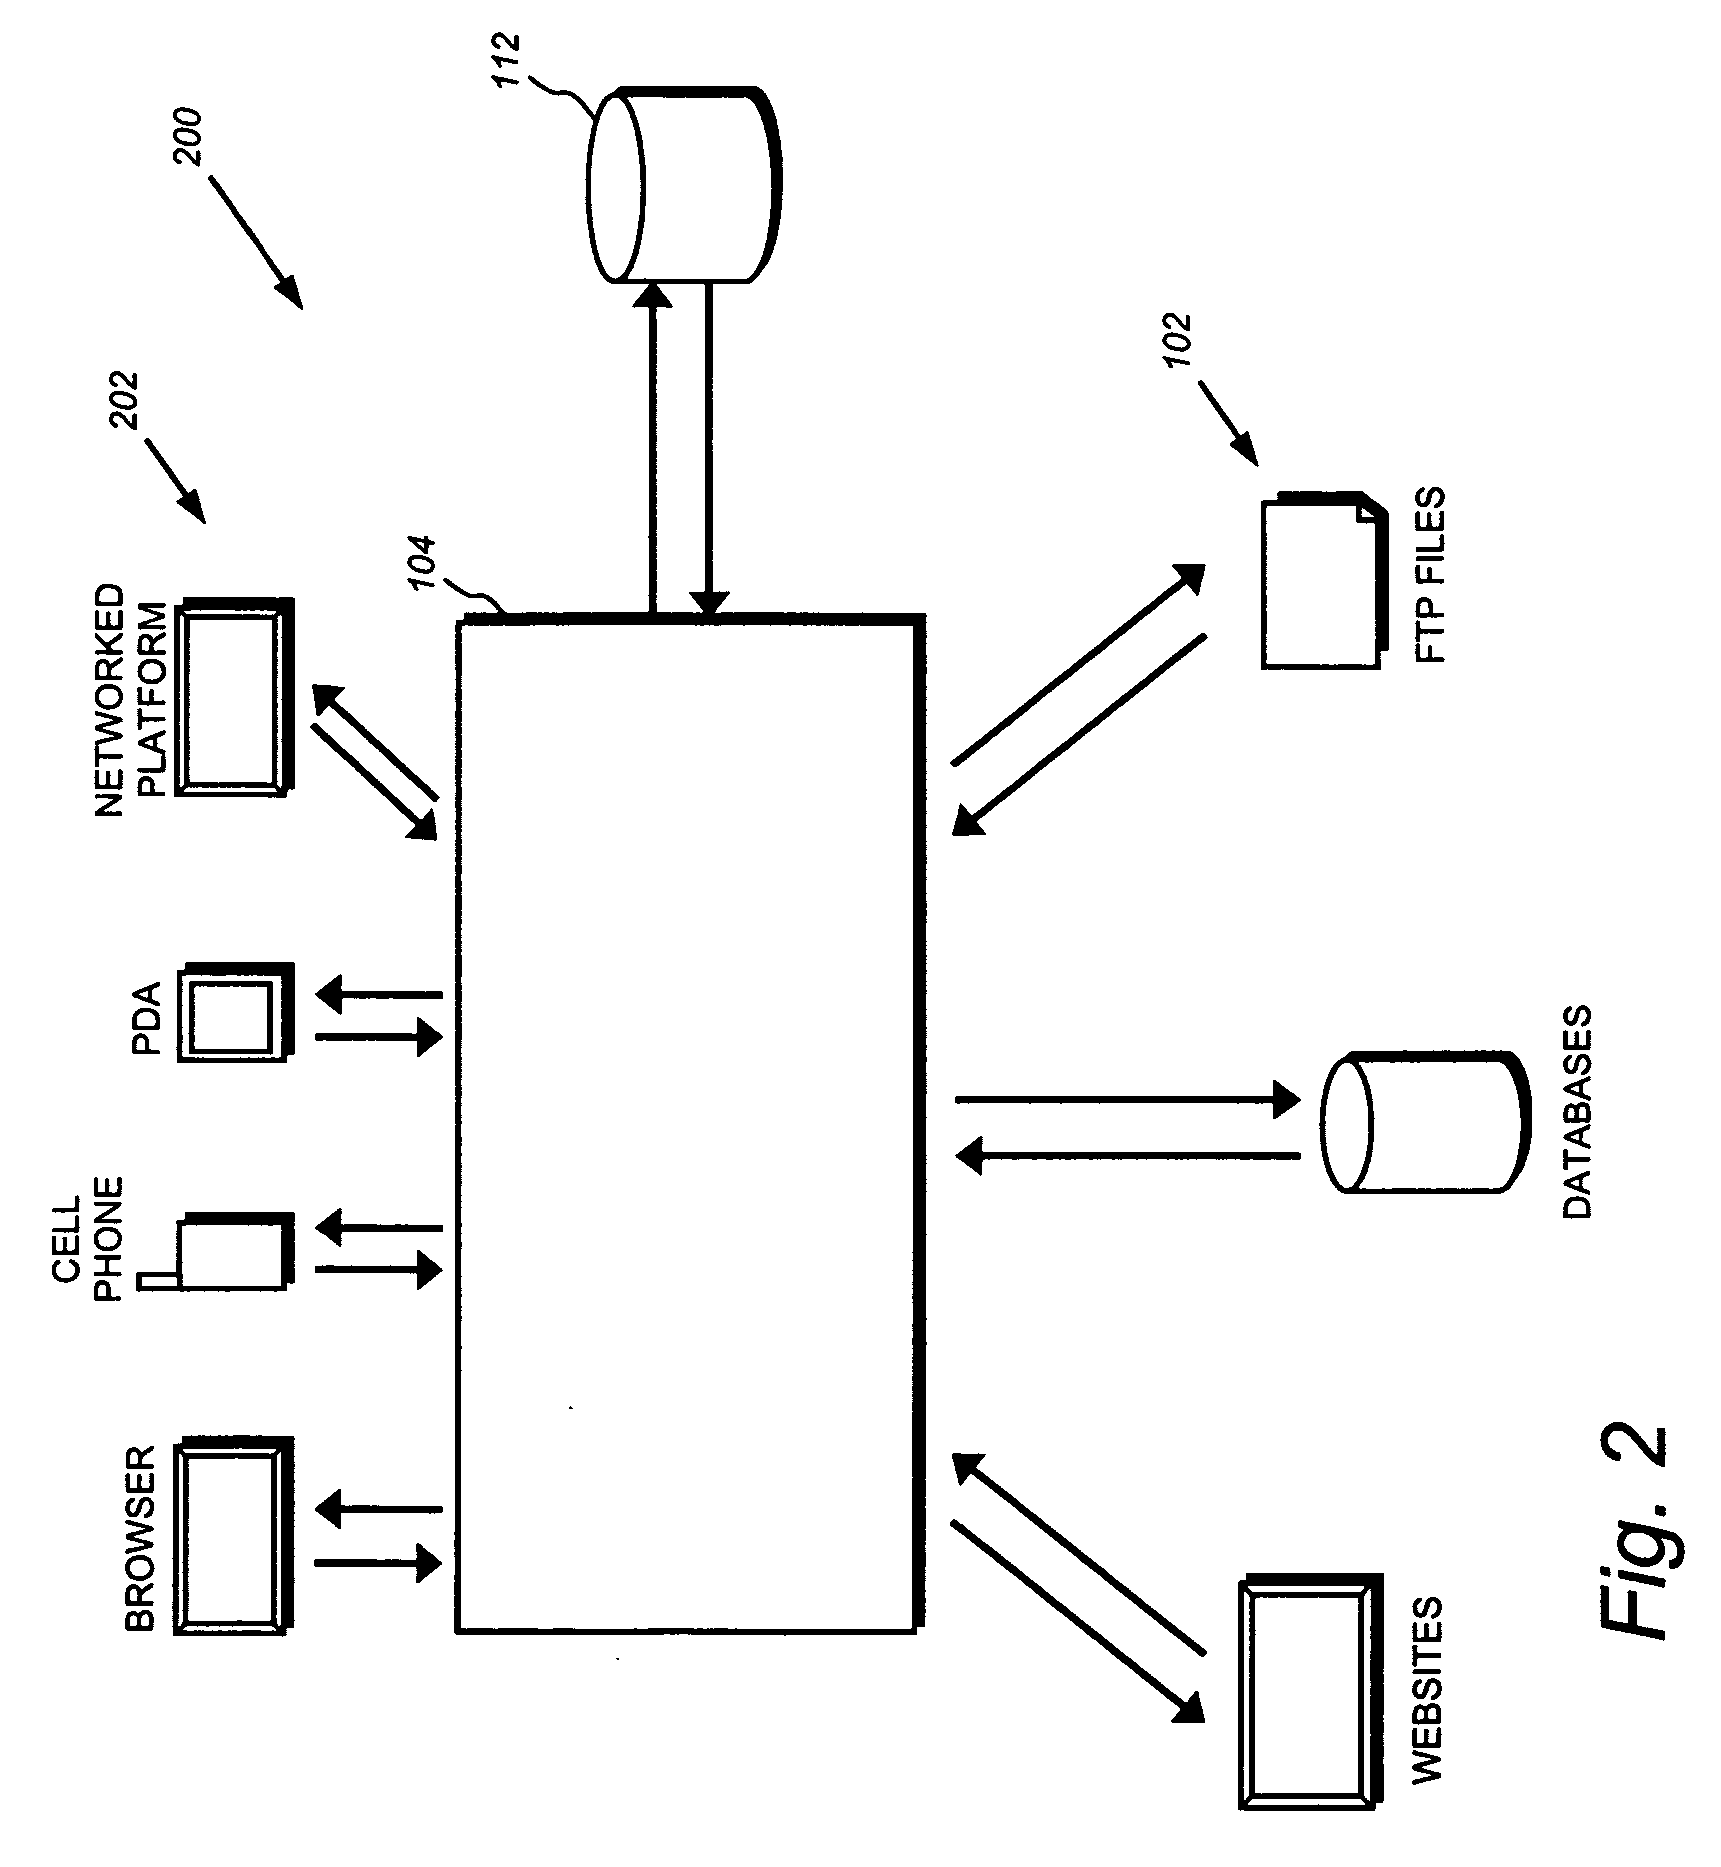 Server-side application programming interface for a real time data integration service